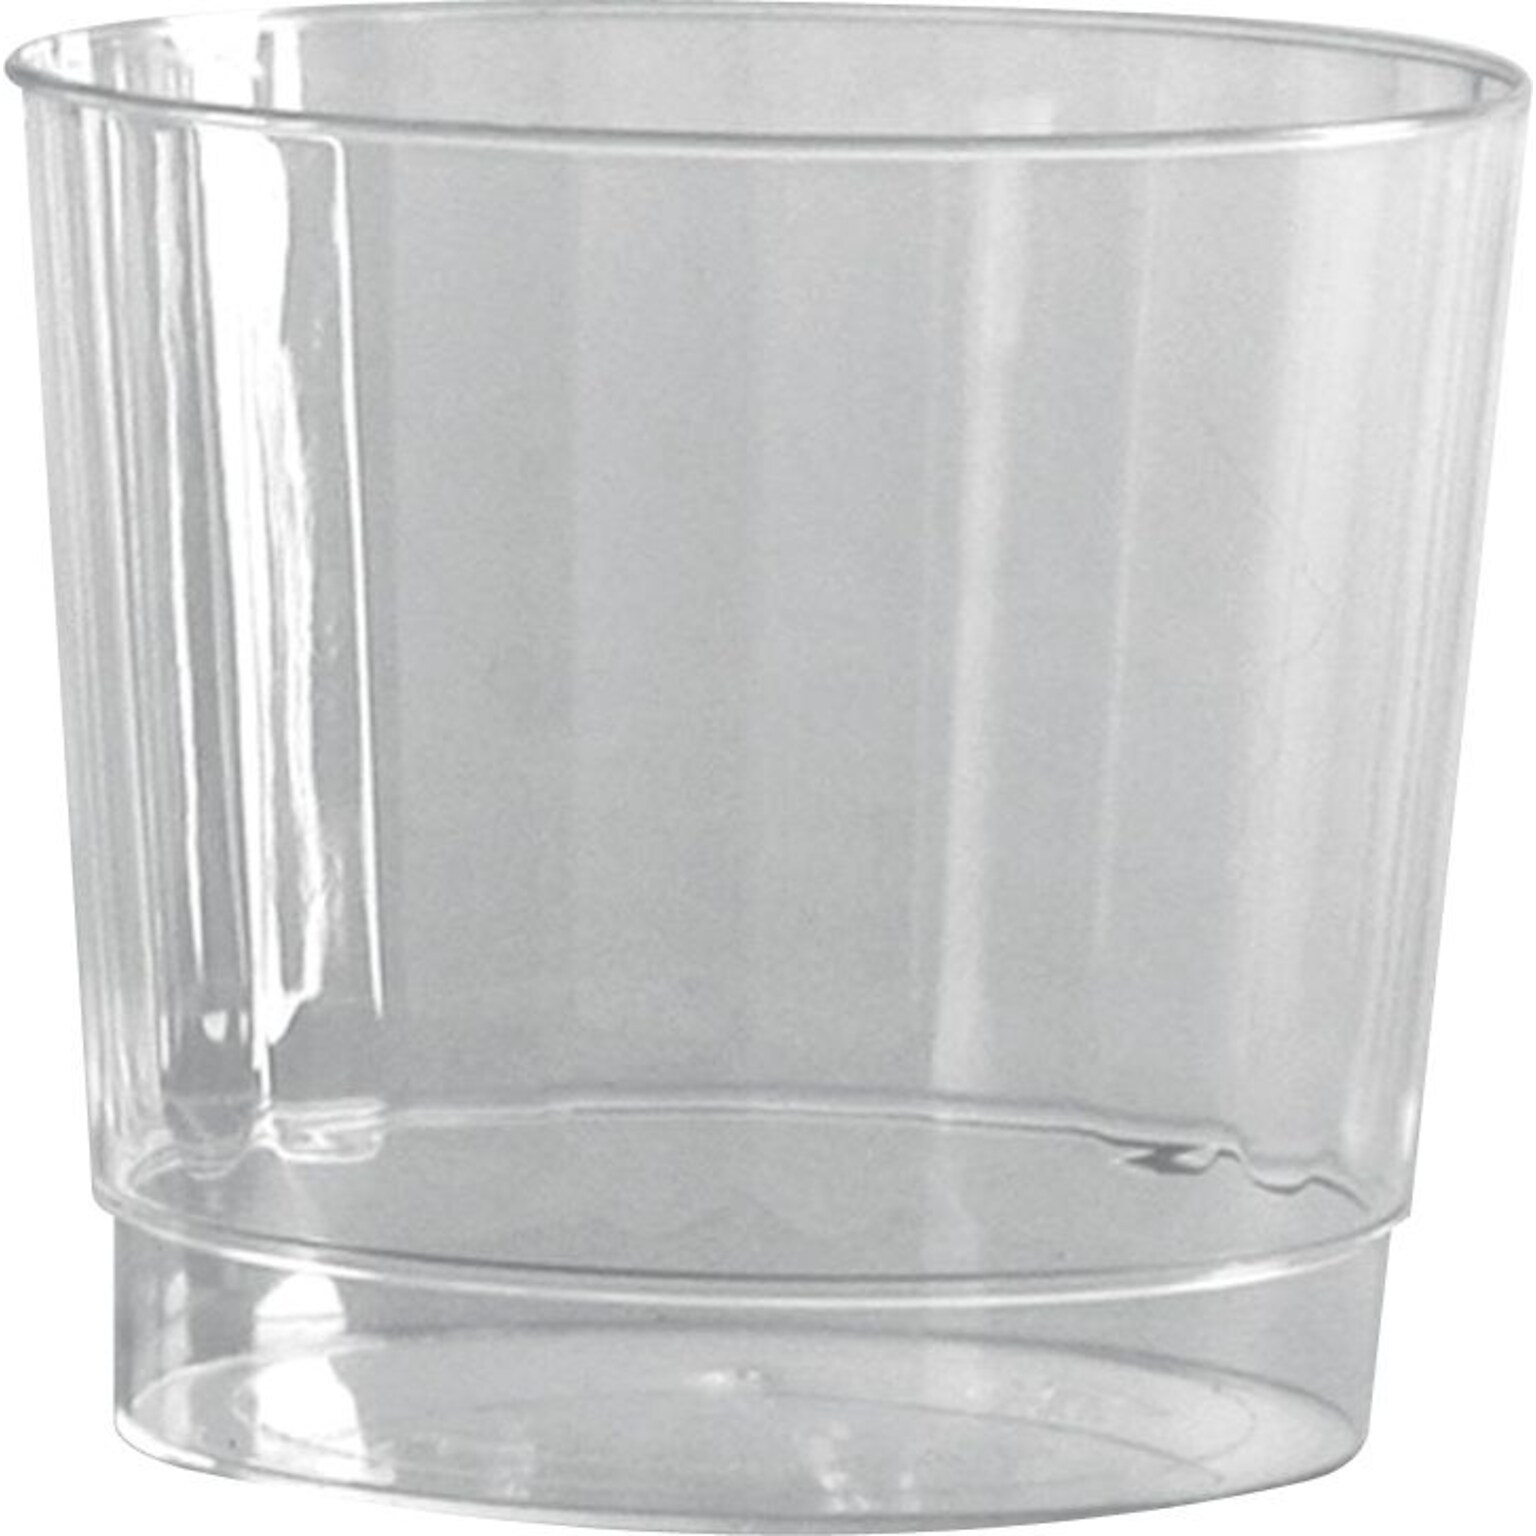 WNA Classic Crystal Plastic Cold Fluted Tumbler, 9 oz., Clear, 20 Cups/Pack, 12 Packs/Carton (WNACCR9240)